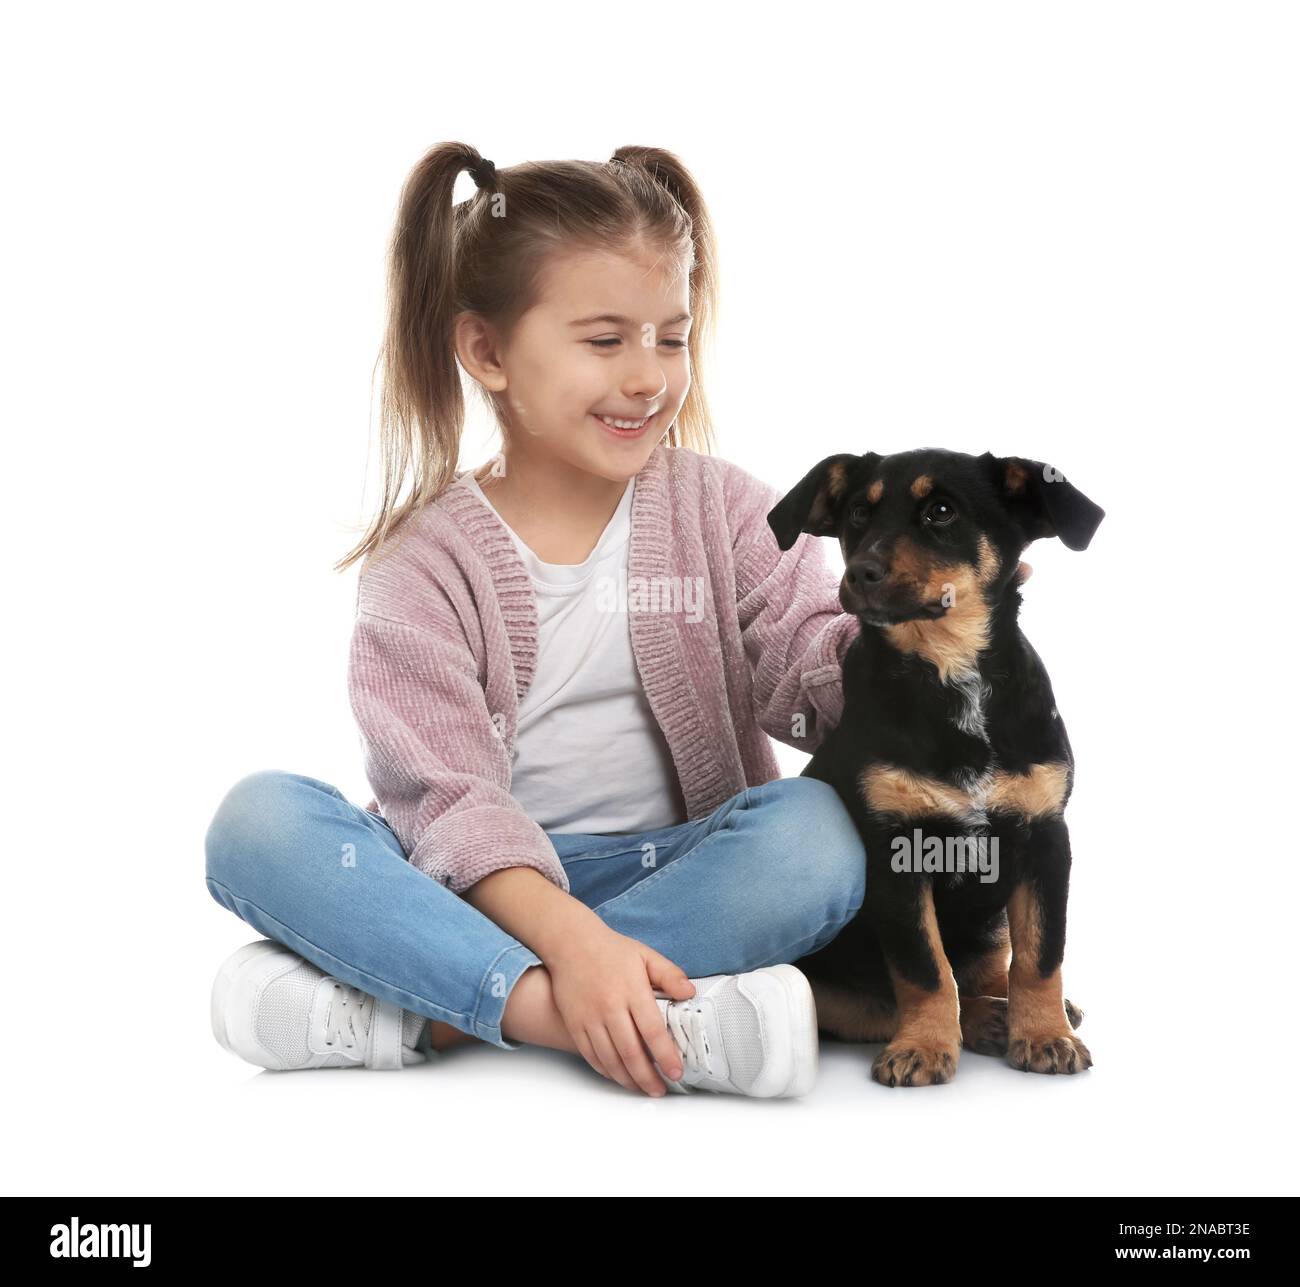 Little girl with cute puppy on white background Stock Photo